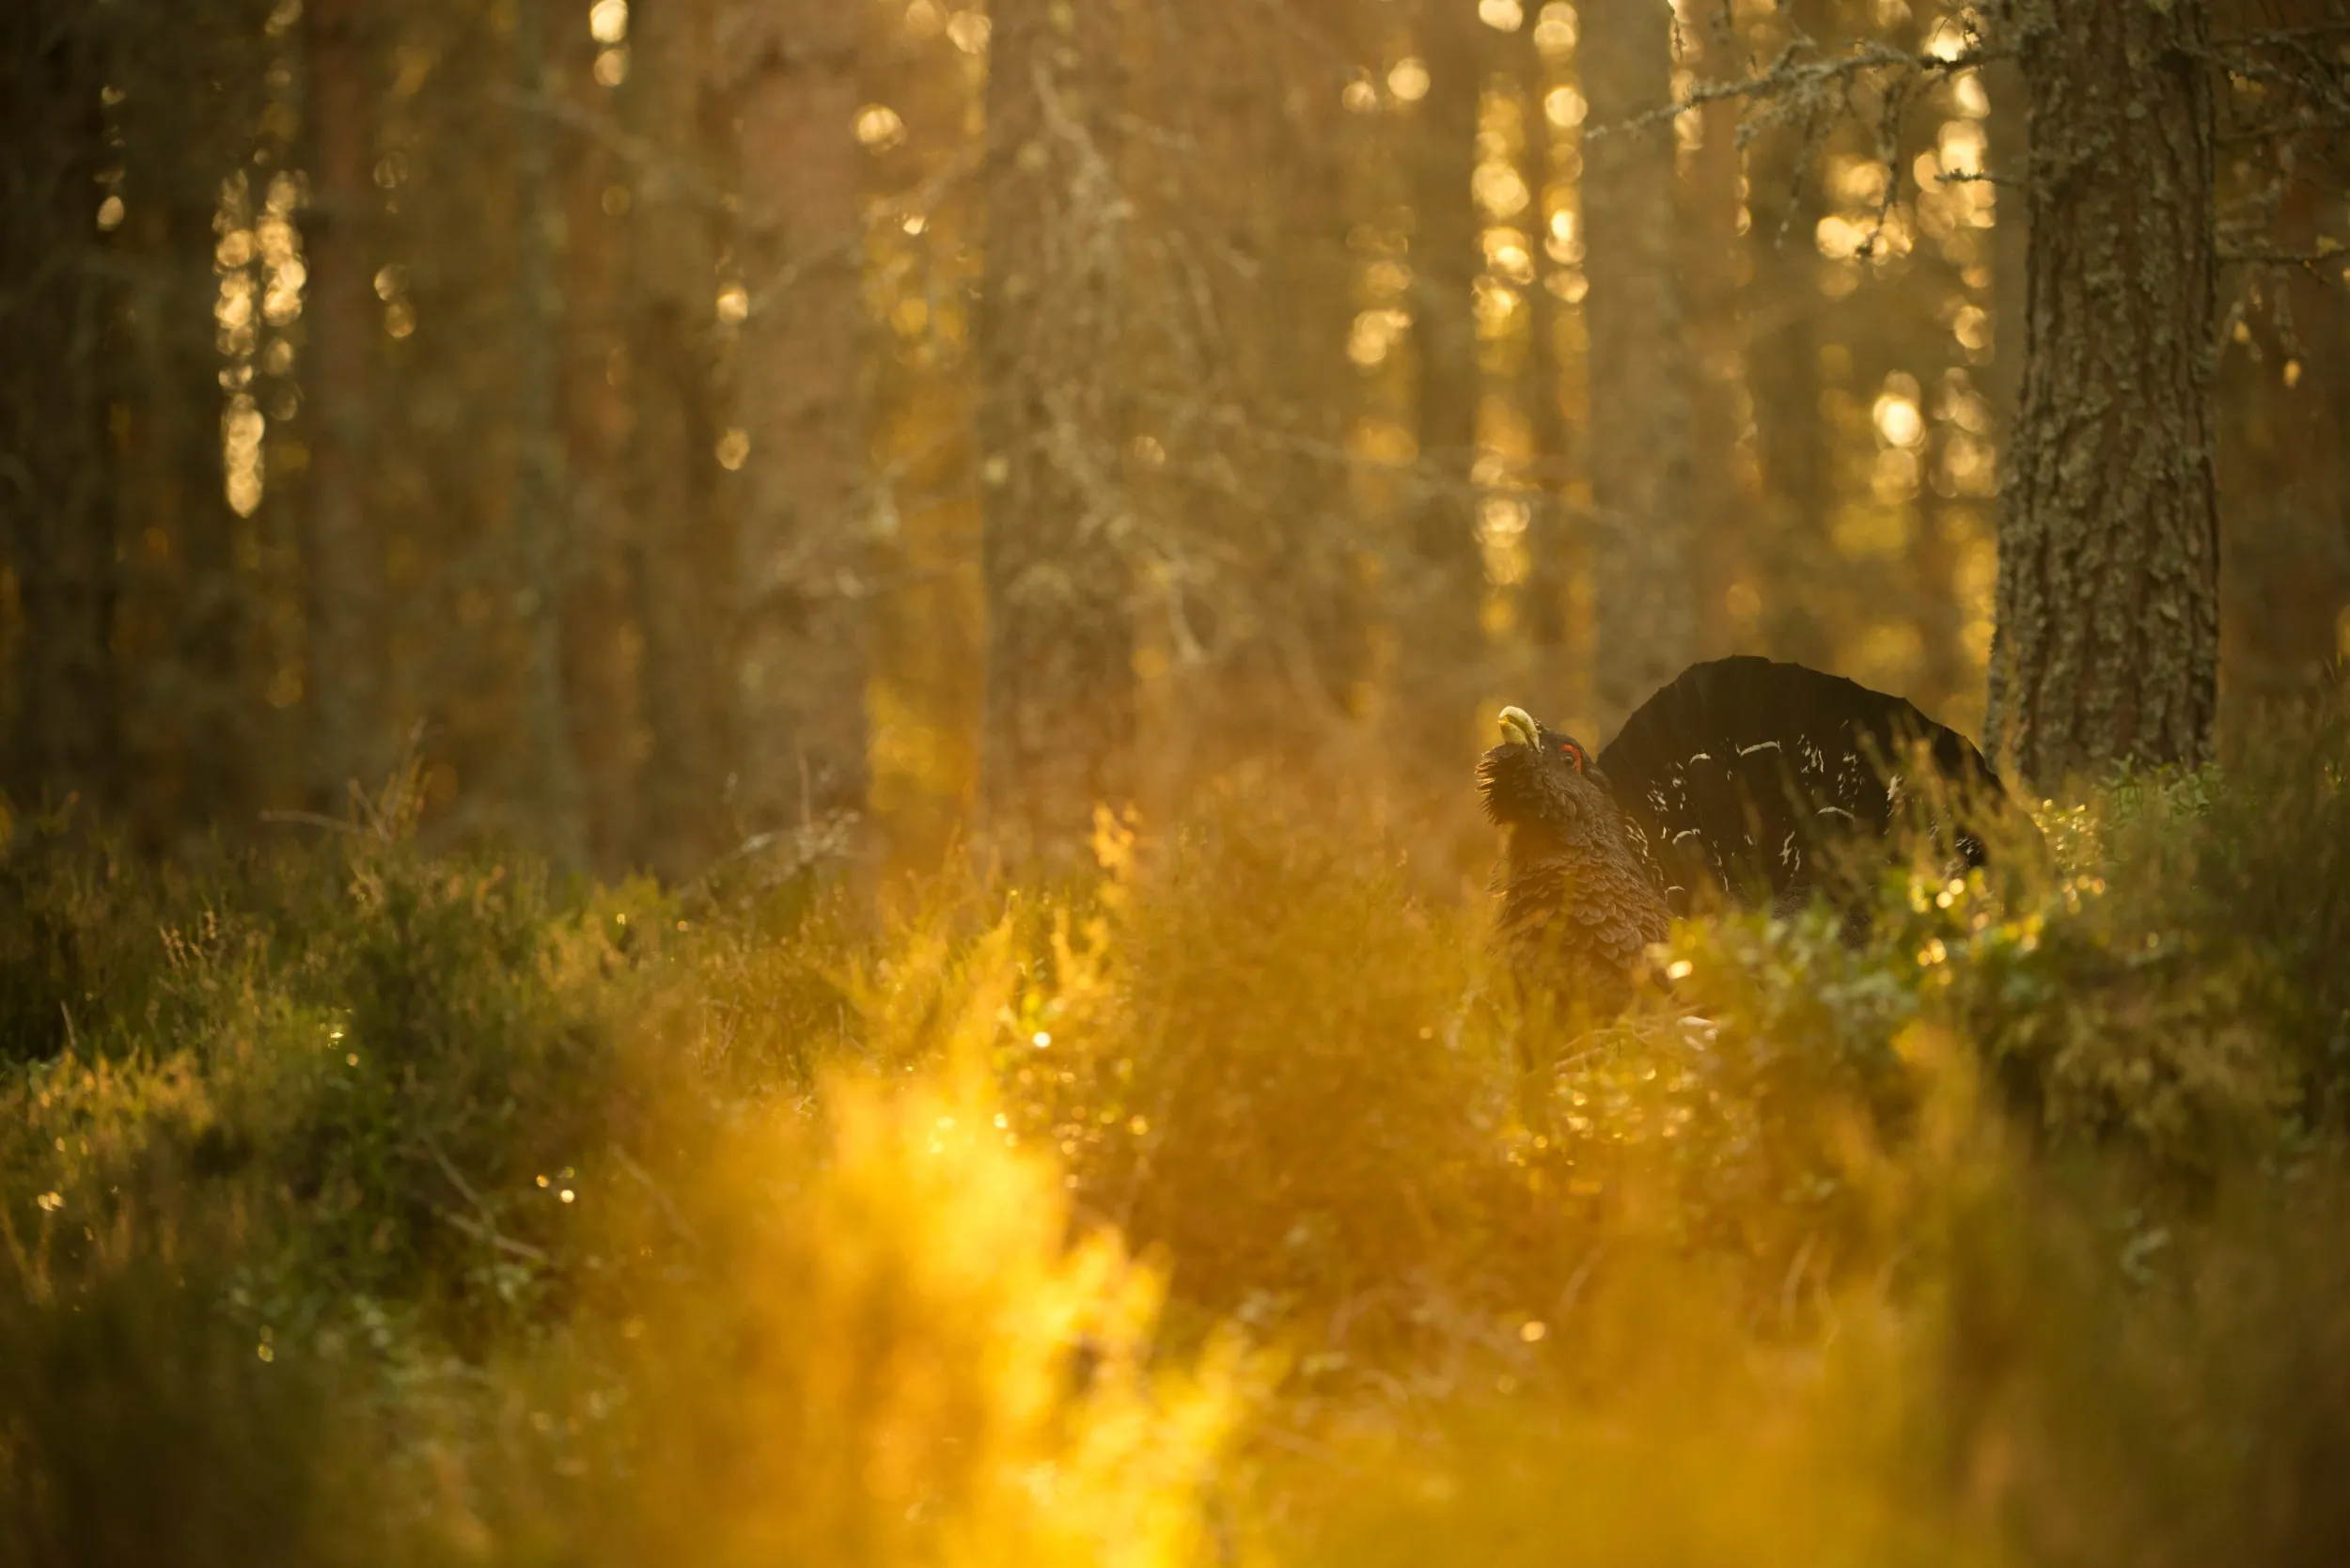 A lone male Capercaillie lekking in a forest illuminated by low sun.